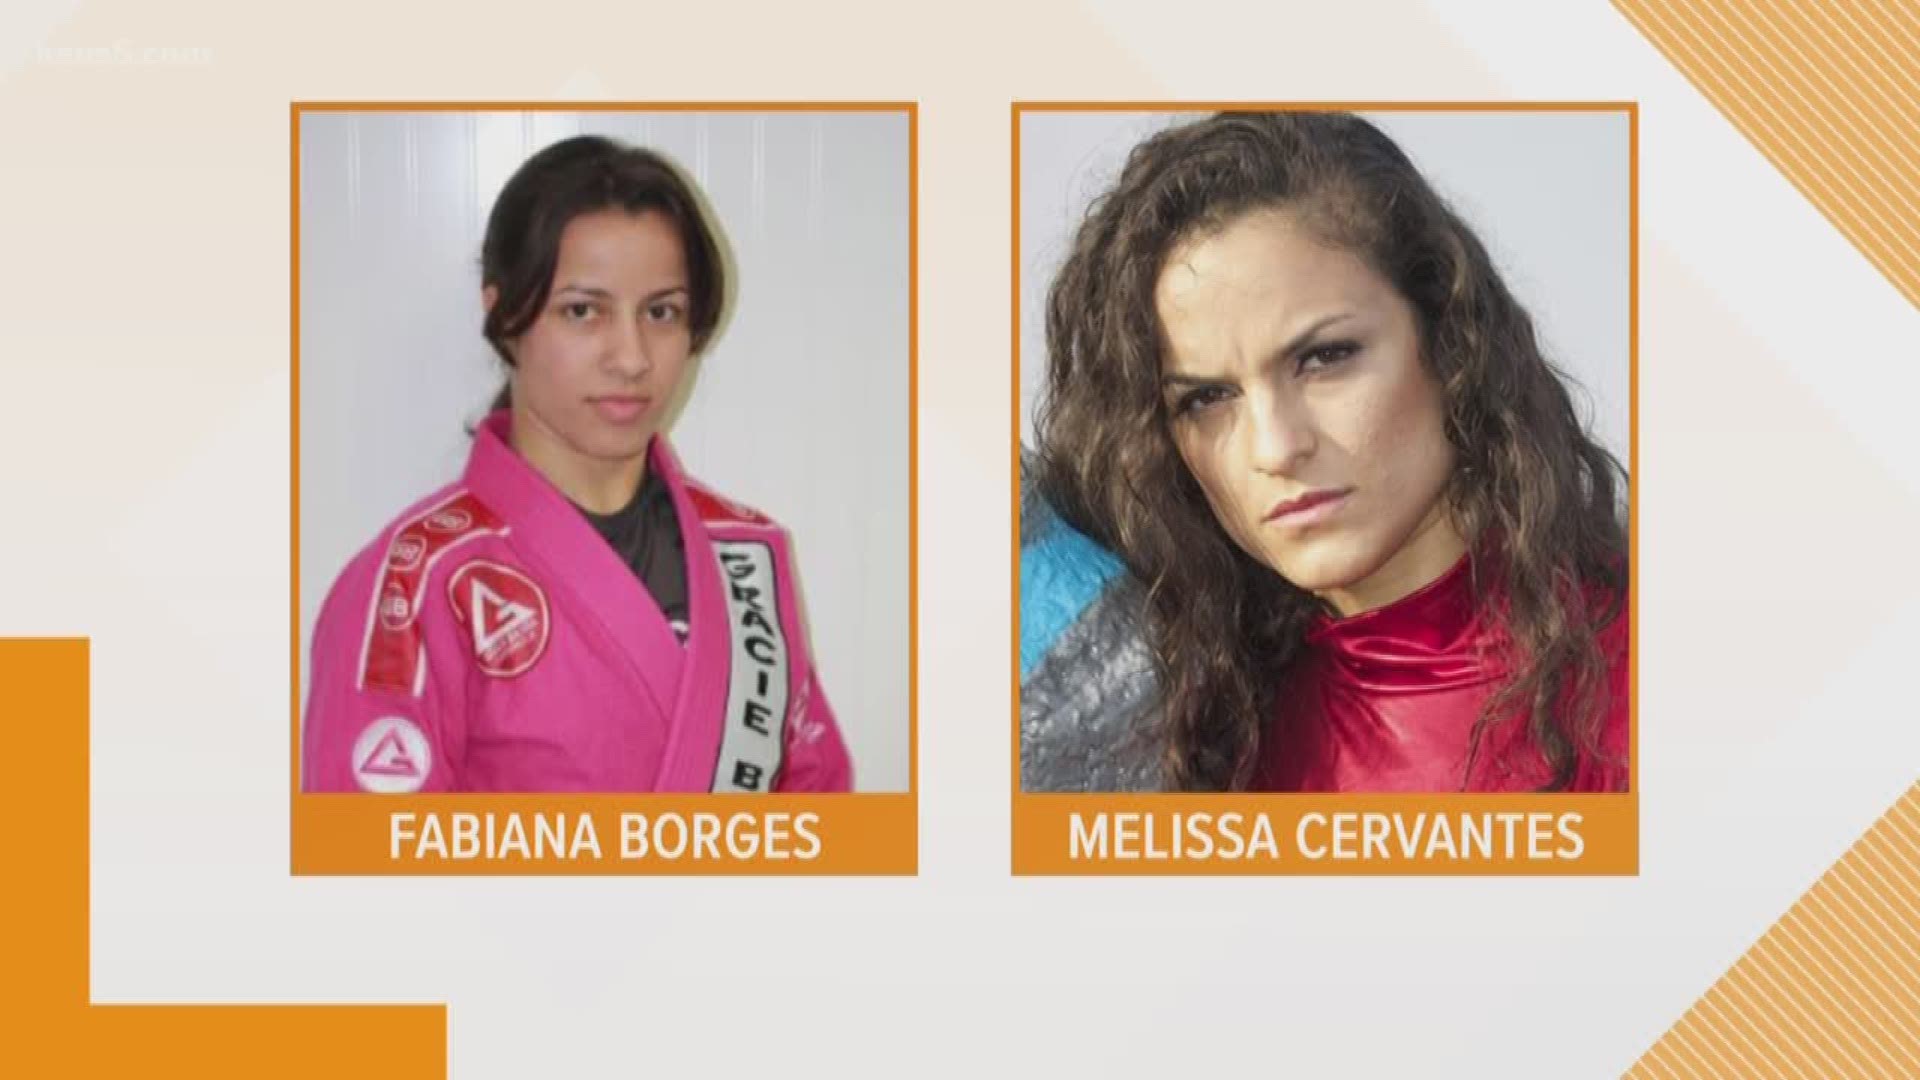 Two World champions will reach another goal, alongside more than 200 other people. Six-time Brazilian Jiu-Jitsu Champion Fabiana Borges and Professional Wrestling Champion, Melissa Cervantes will be sworn-in as U.S. citizens Thursday.